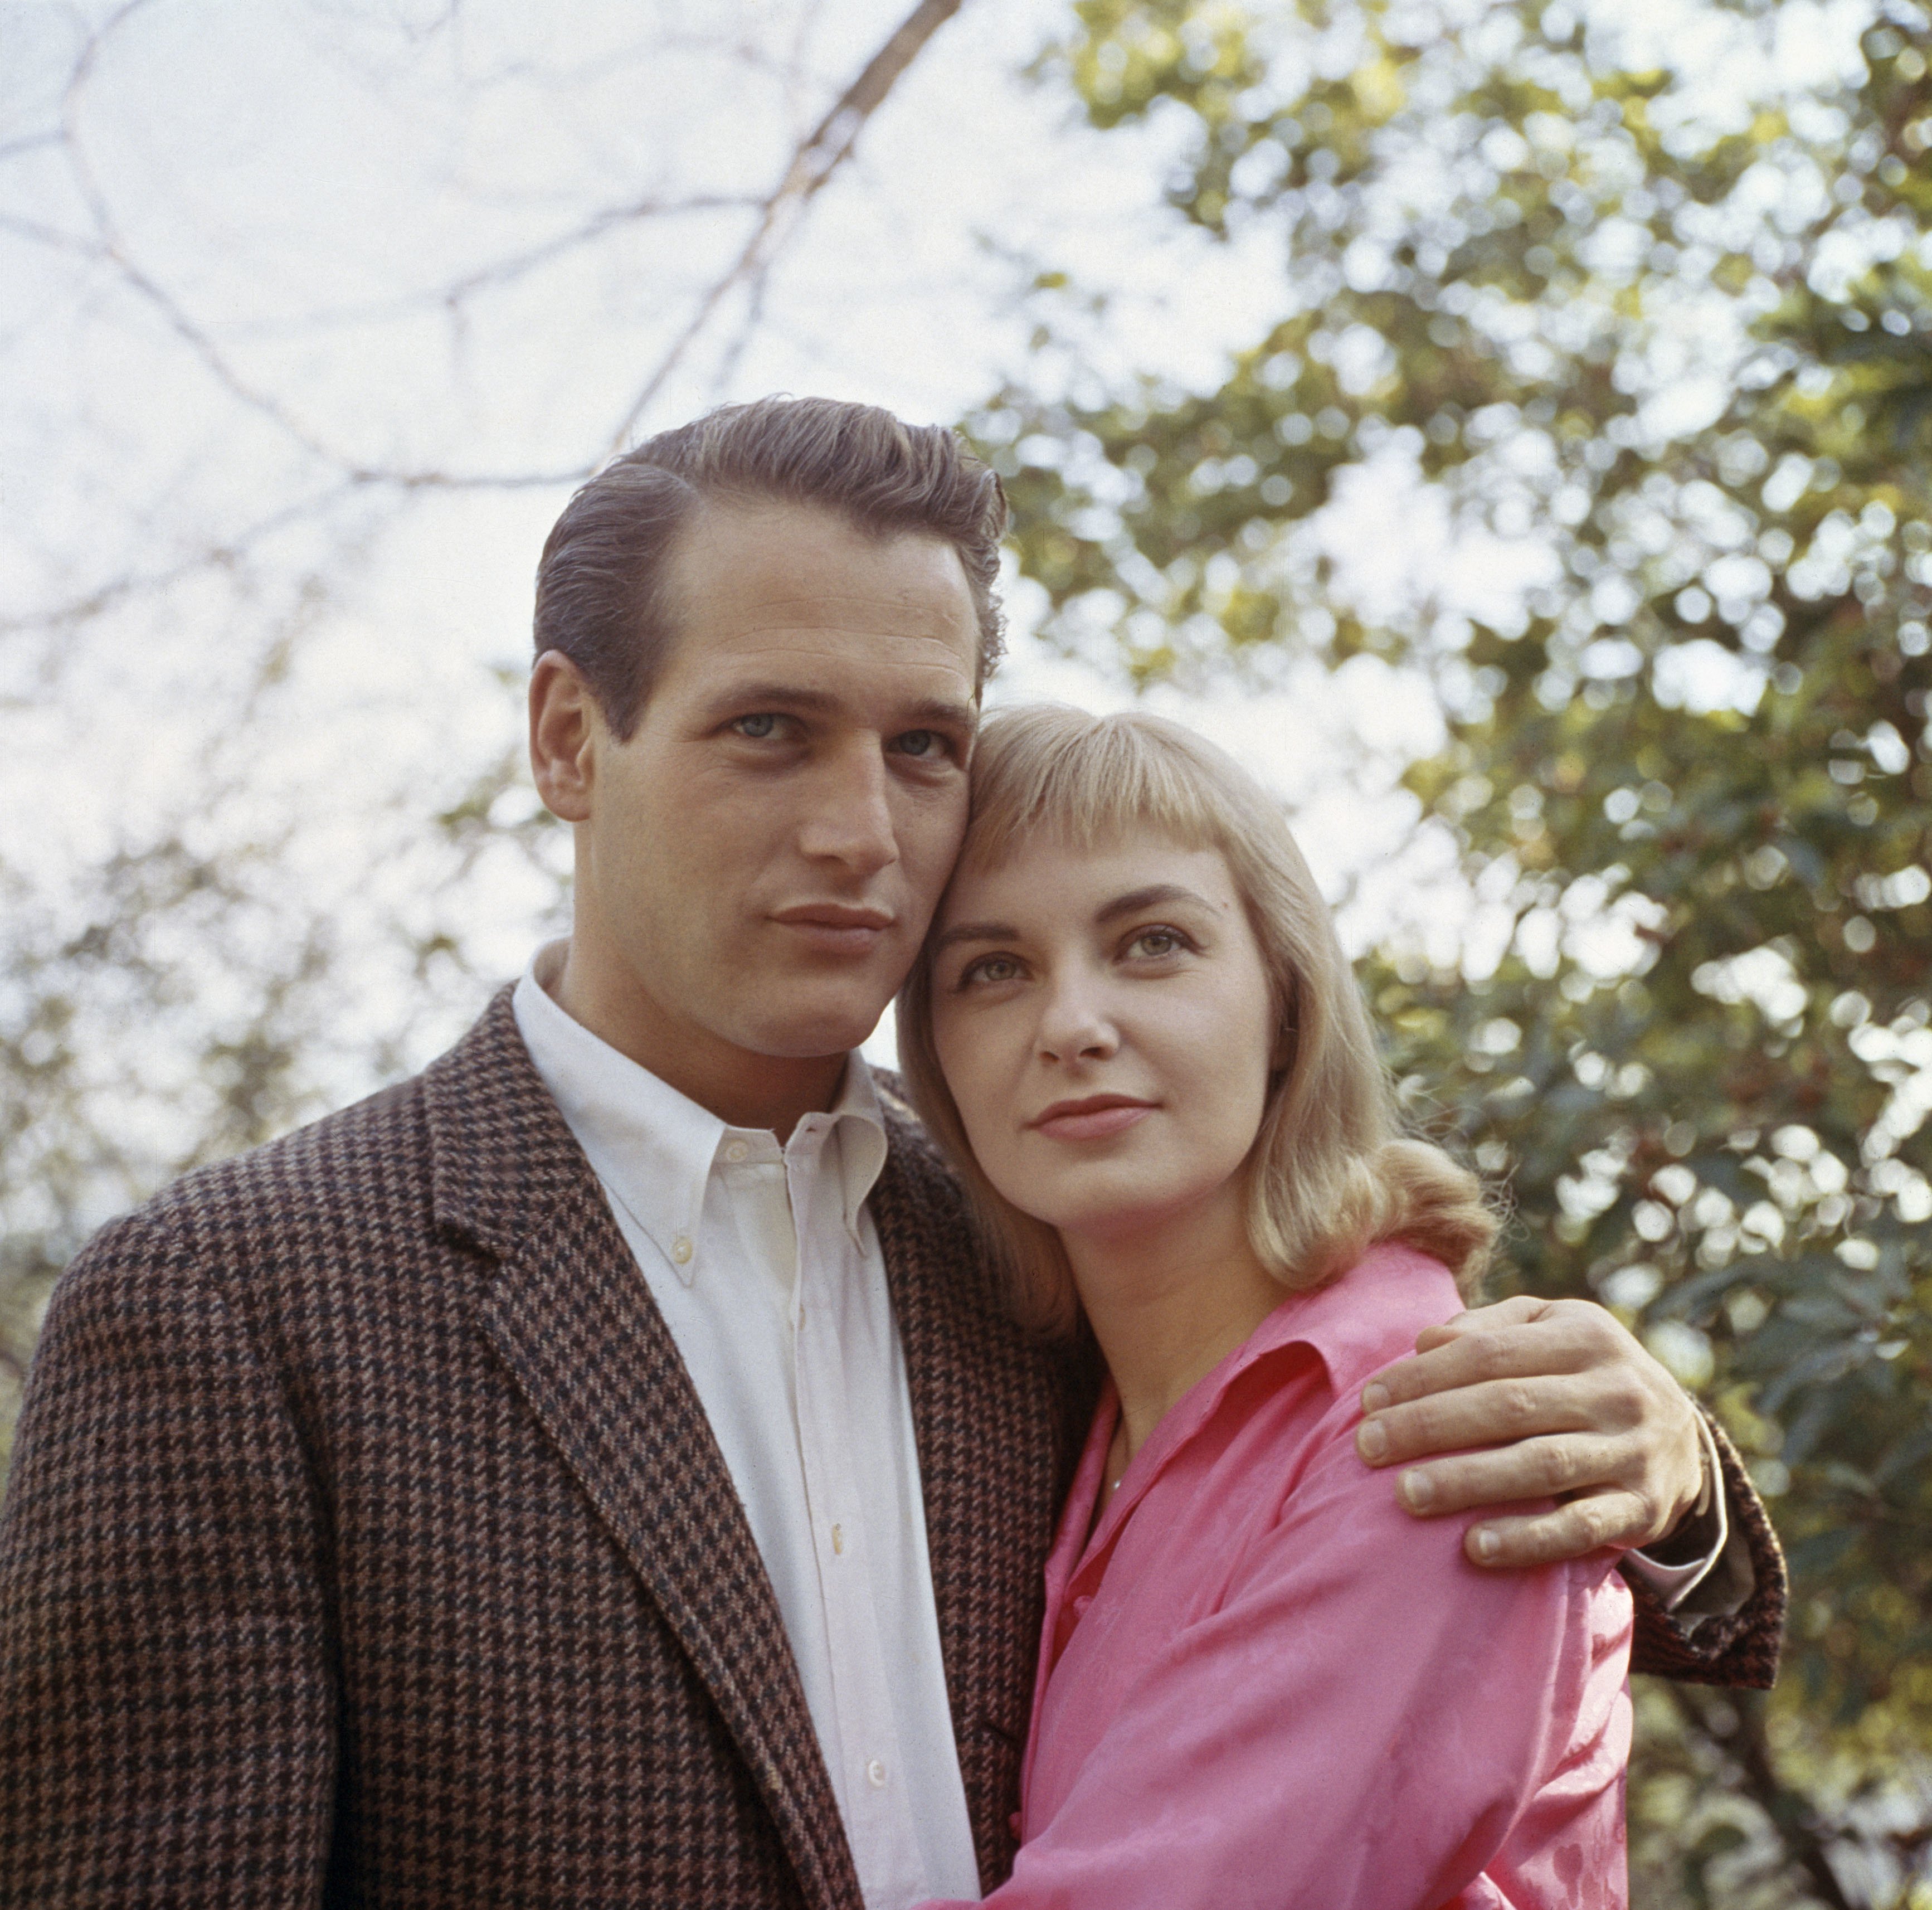 An undated image of Broadway stars, Paul Newman and his wife, Joanne Woodward | Photo: Getty Images